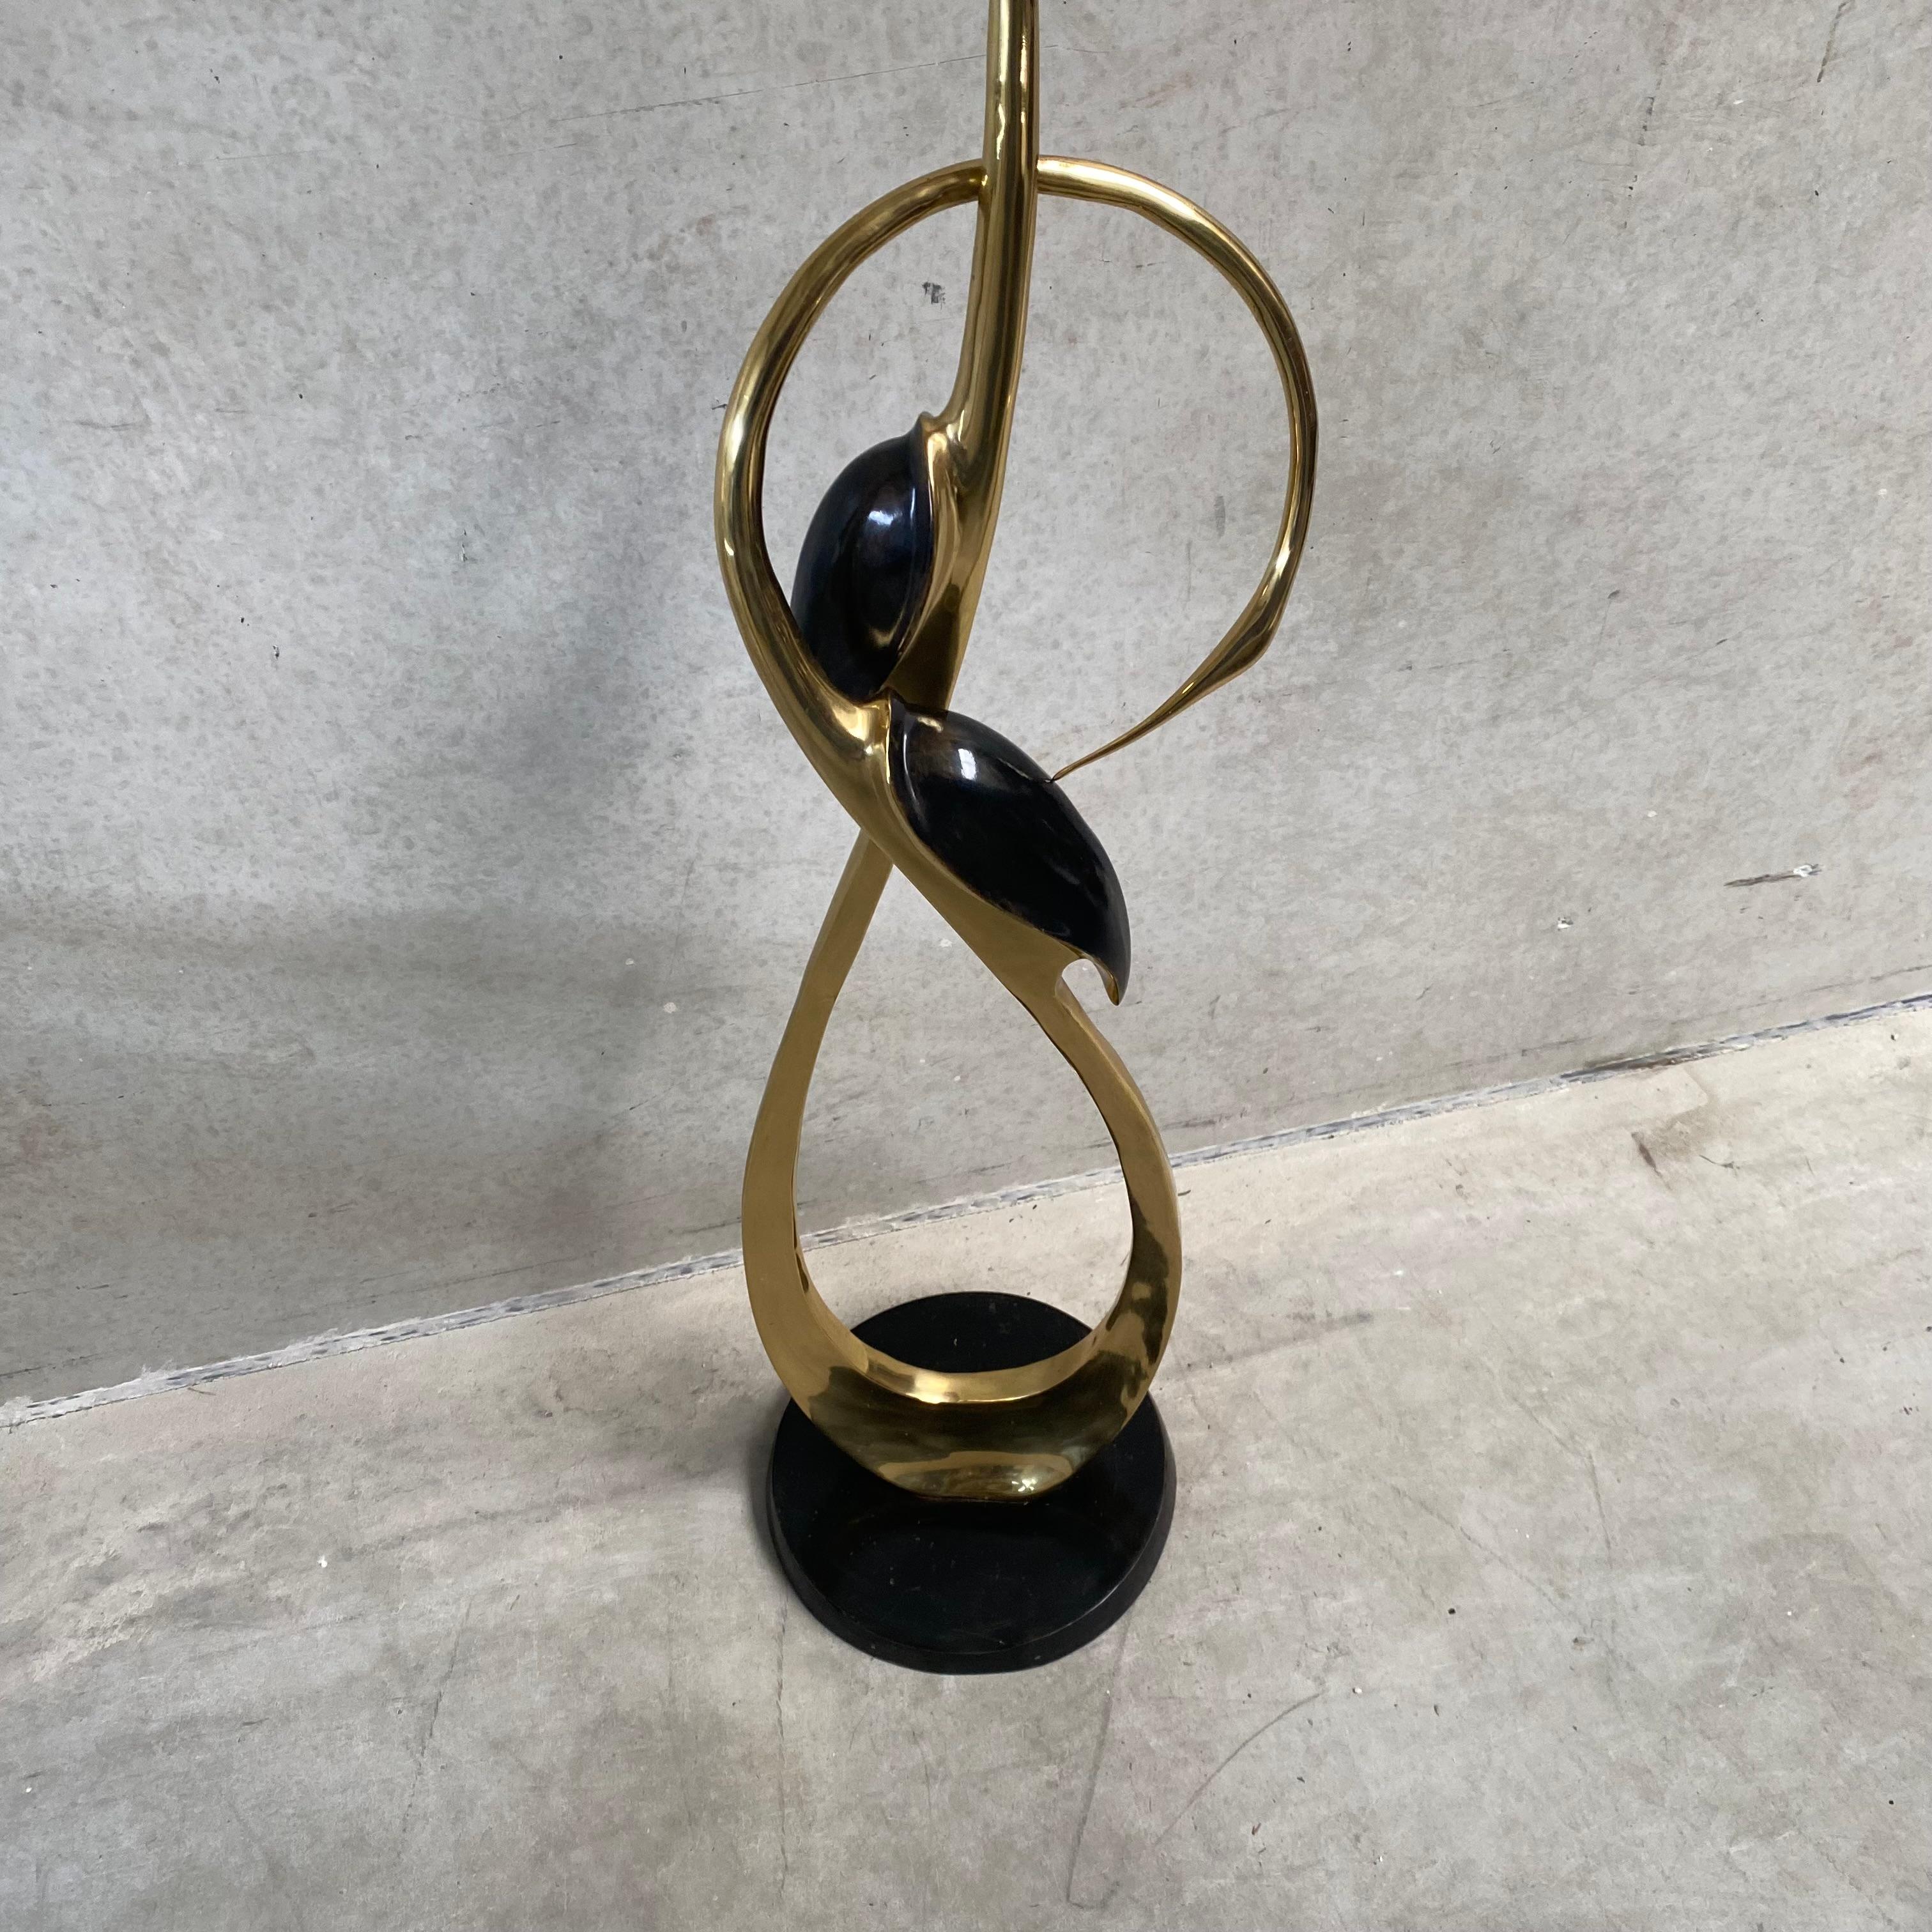 Tall Brass Entwined Cranes Sculpture by Boris Lovet Lorski For Sale 6